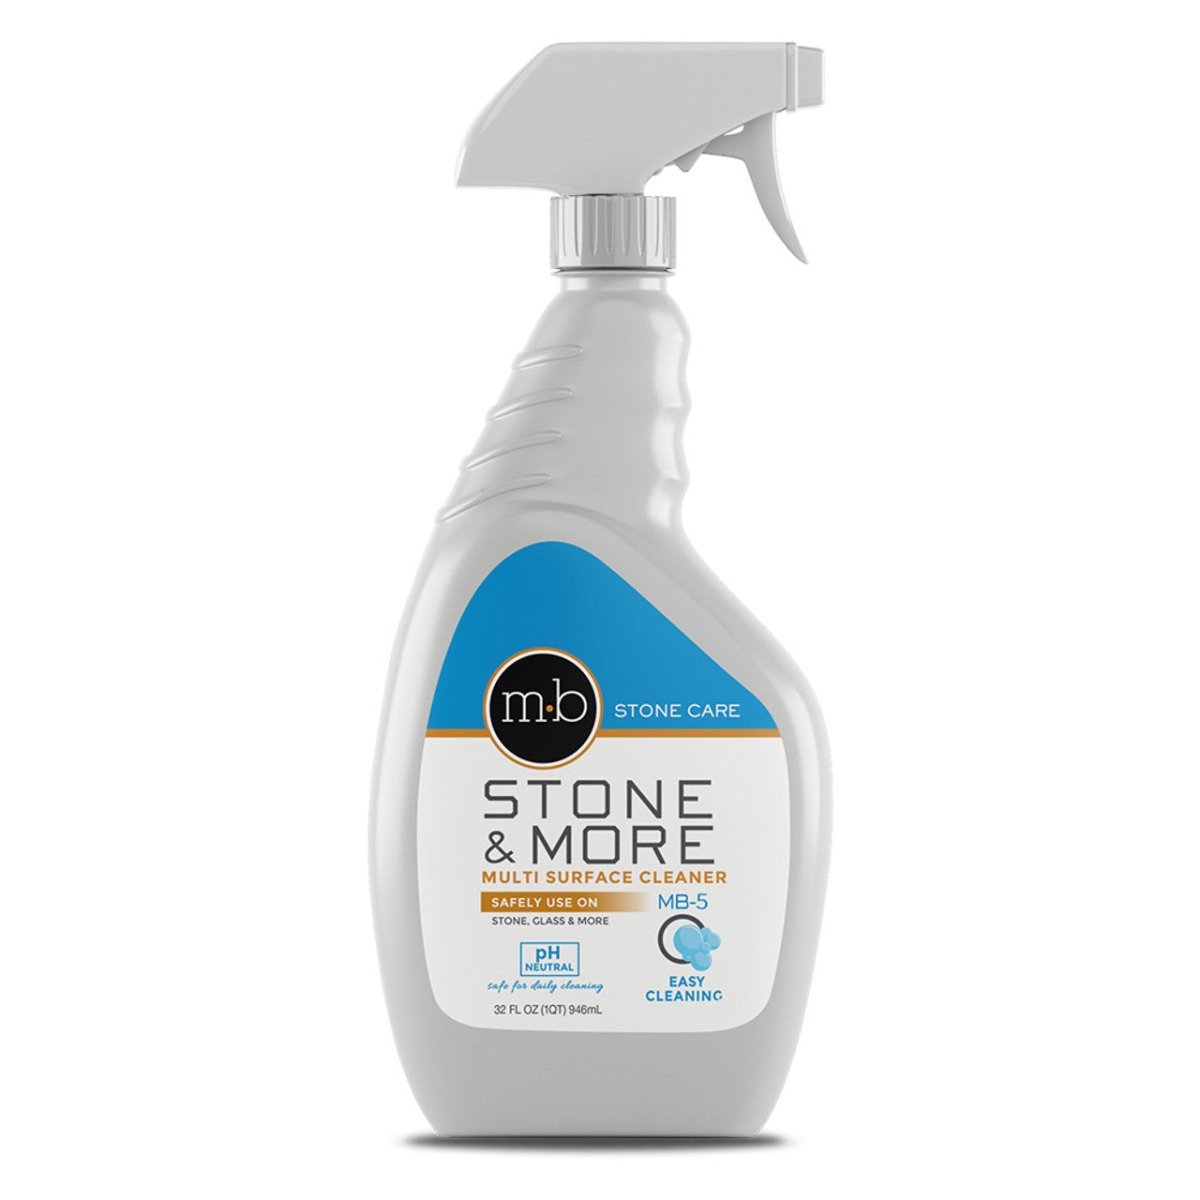 MB-5 Stone & More - MB Stone Care